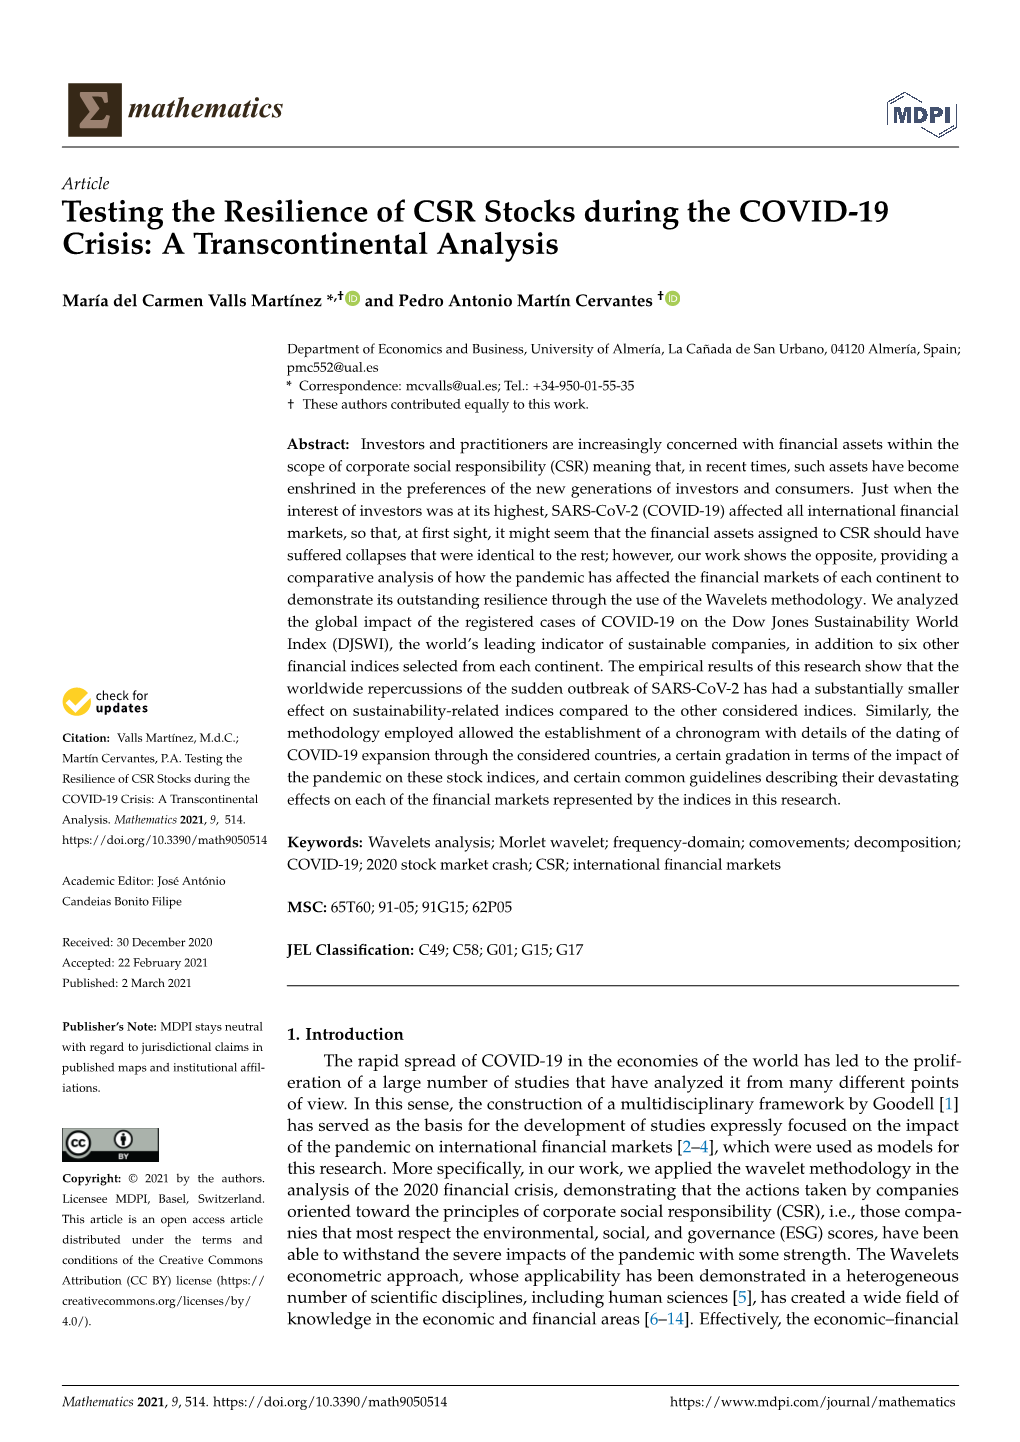 Testing the Resilience of CSR Stocks During the COVID-19 Crisis: a Transcontinental Analysis